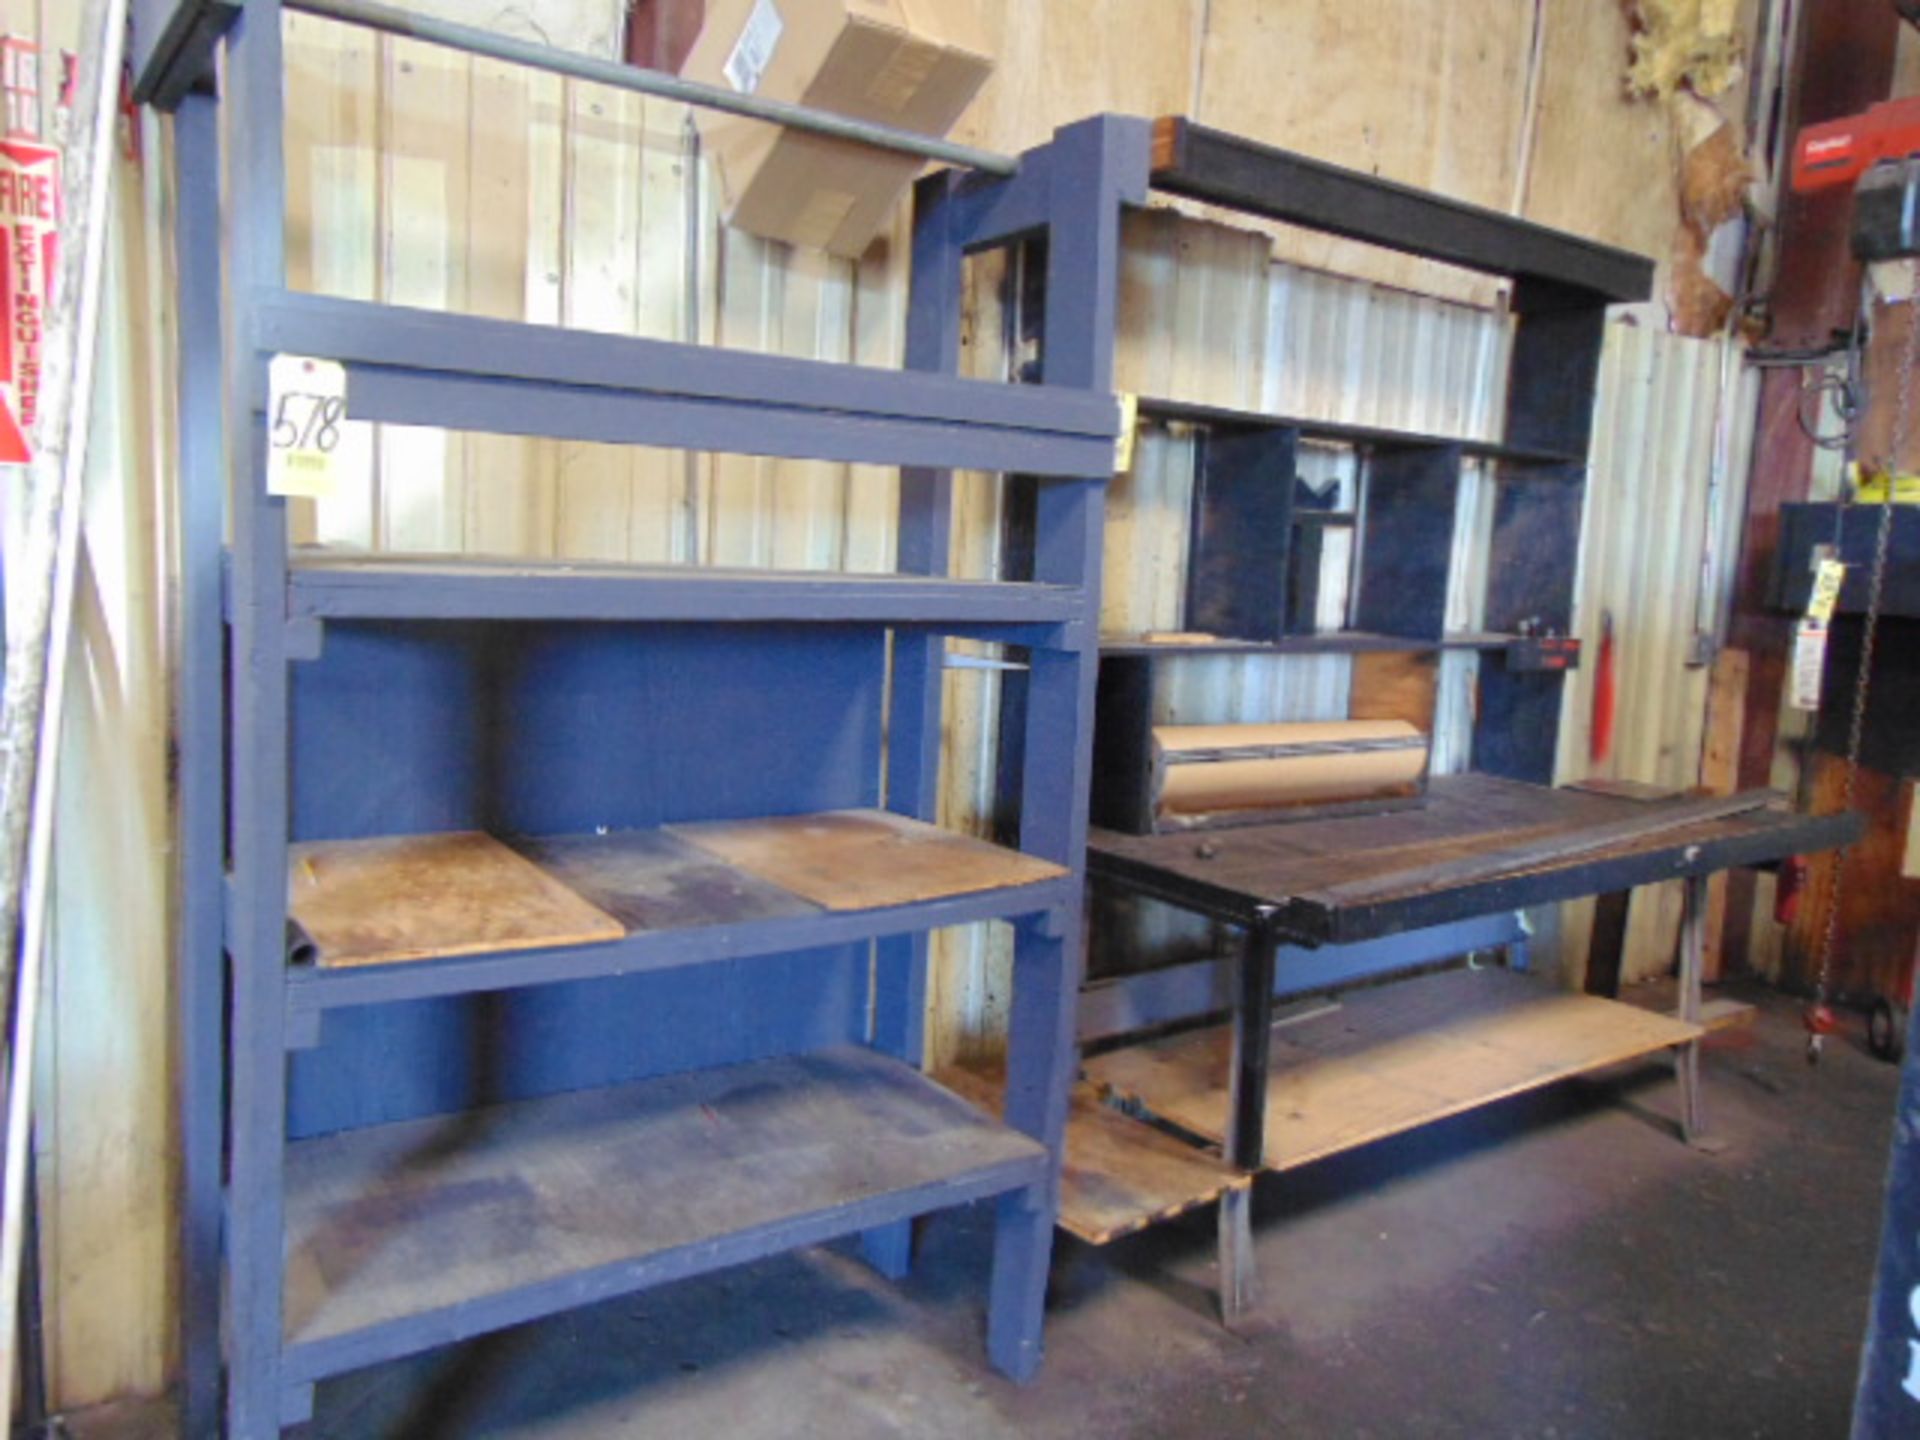 LOT CONSISTING OF: work bench & wood shelf